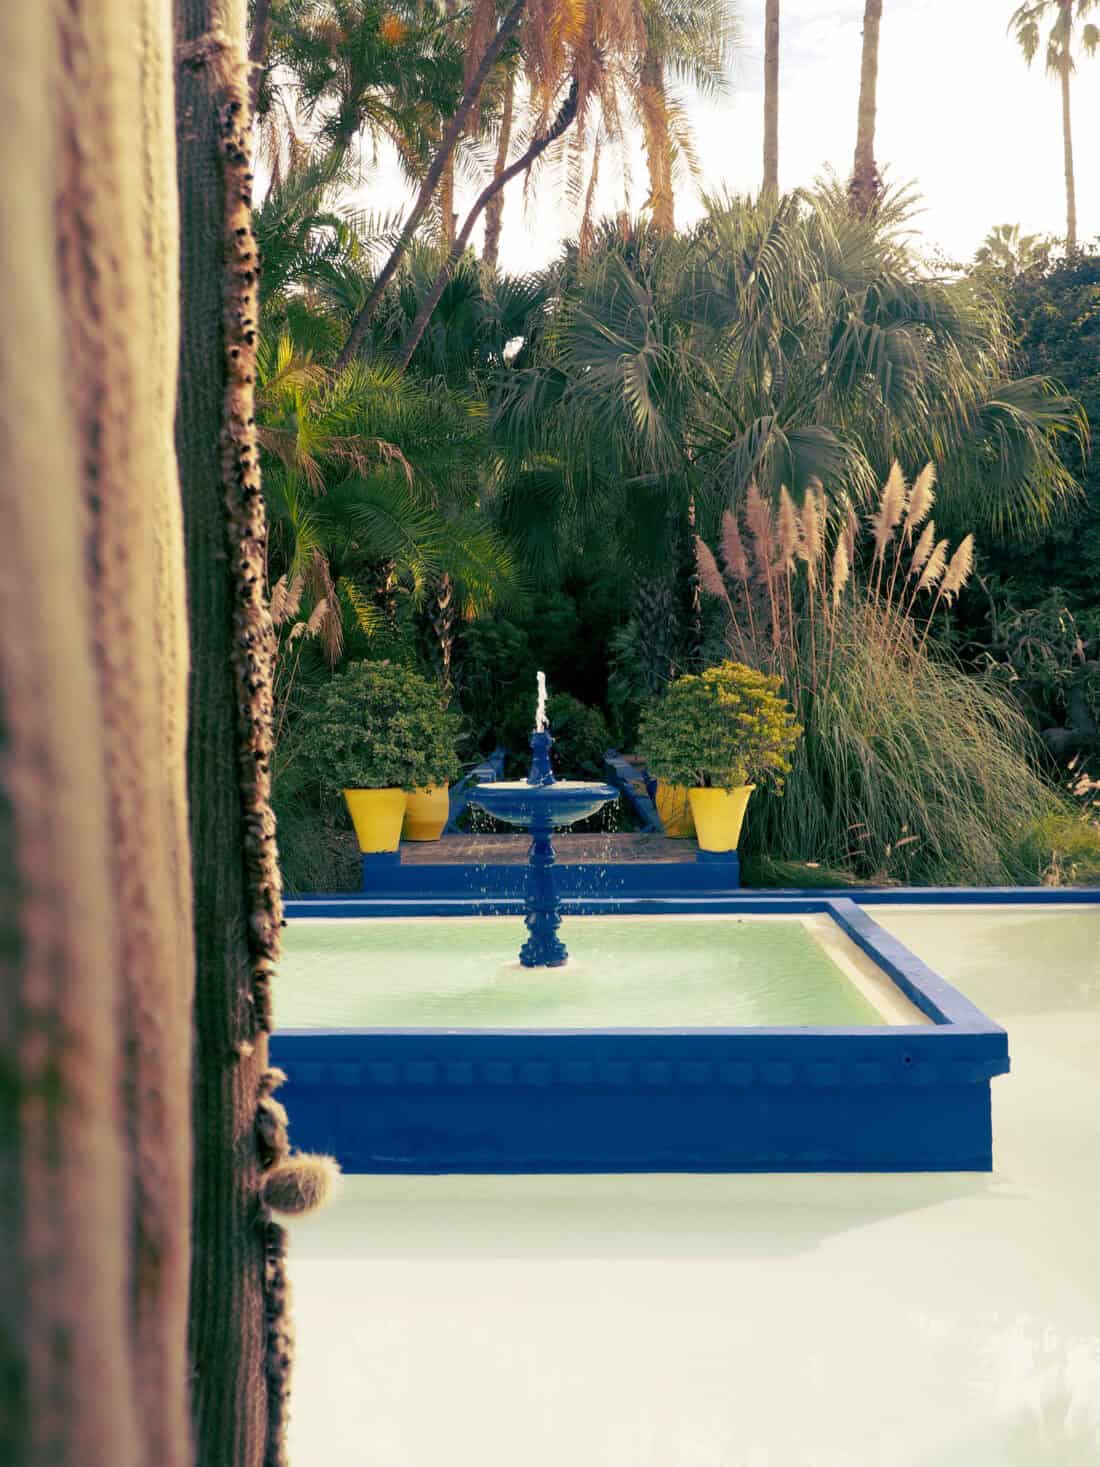 A tranquil fountain surrounded by lush greenery and palm trees, viewed from behind a textured curtain.